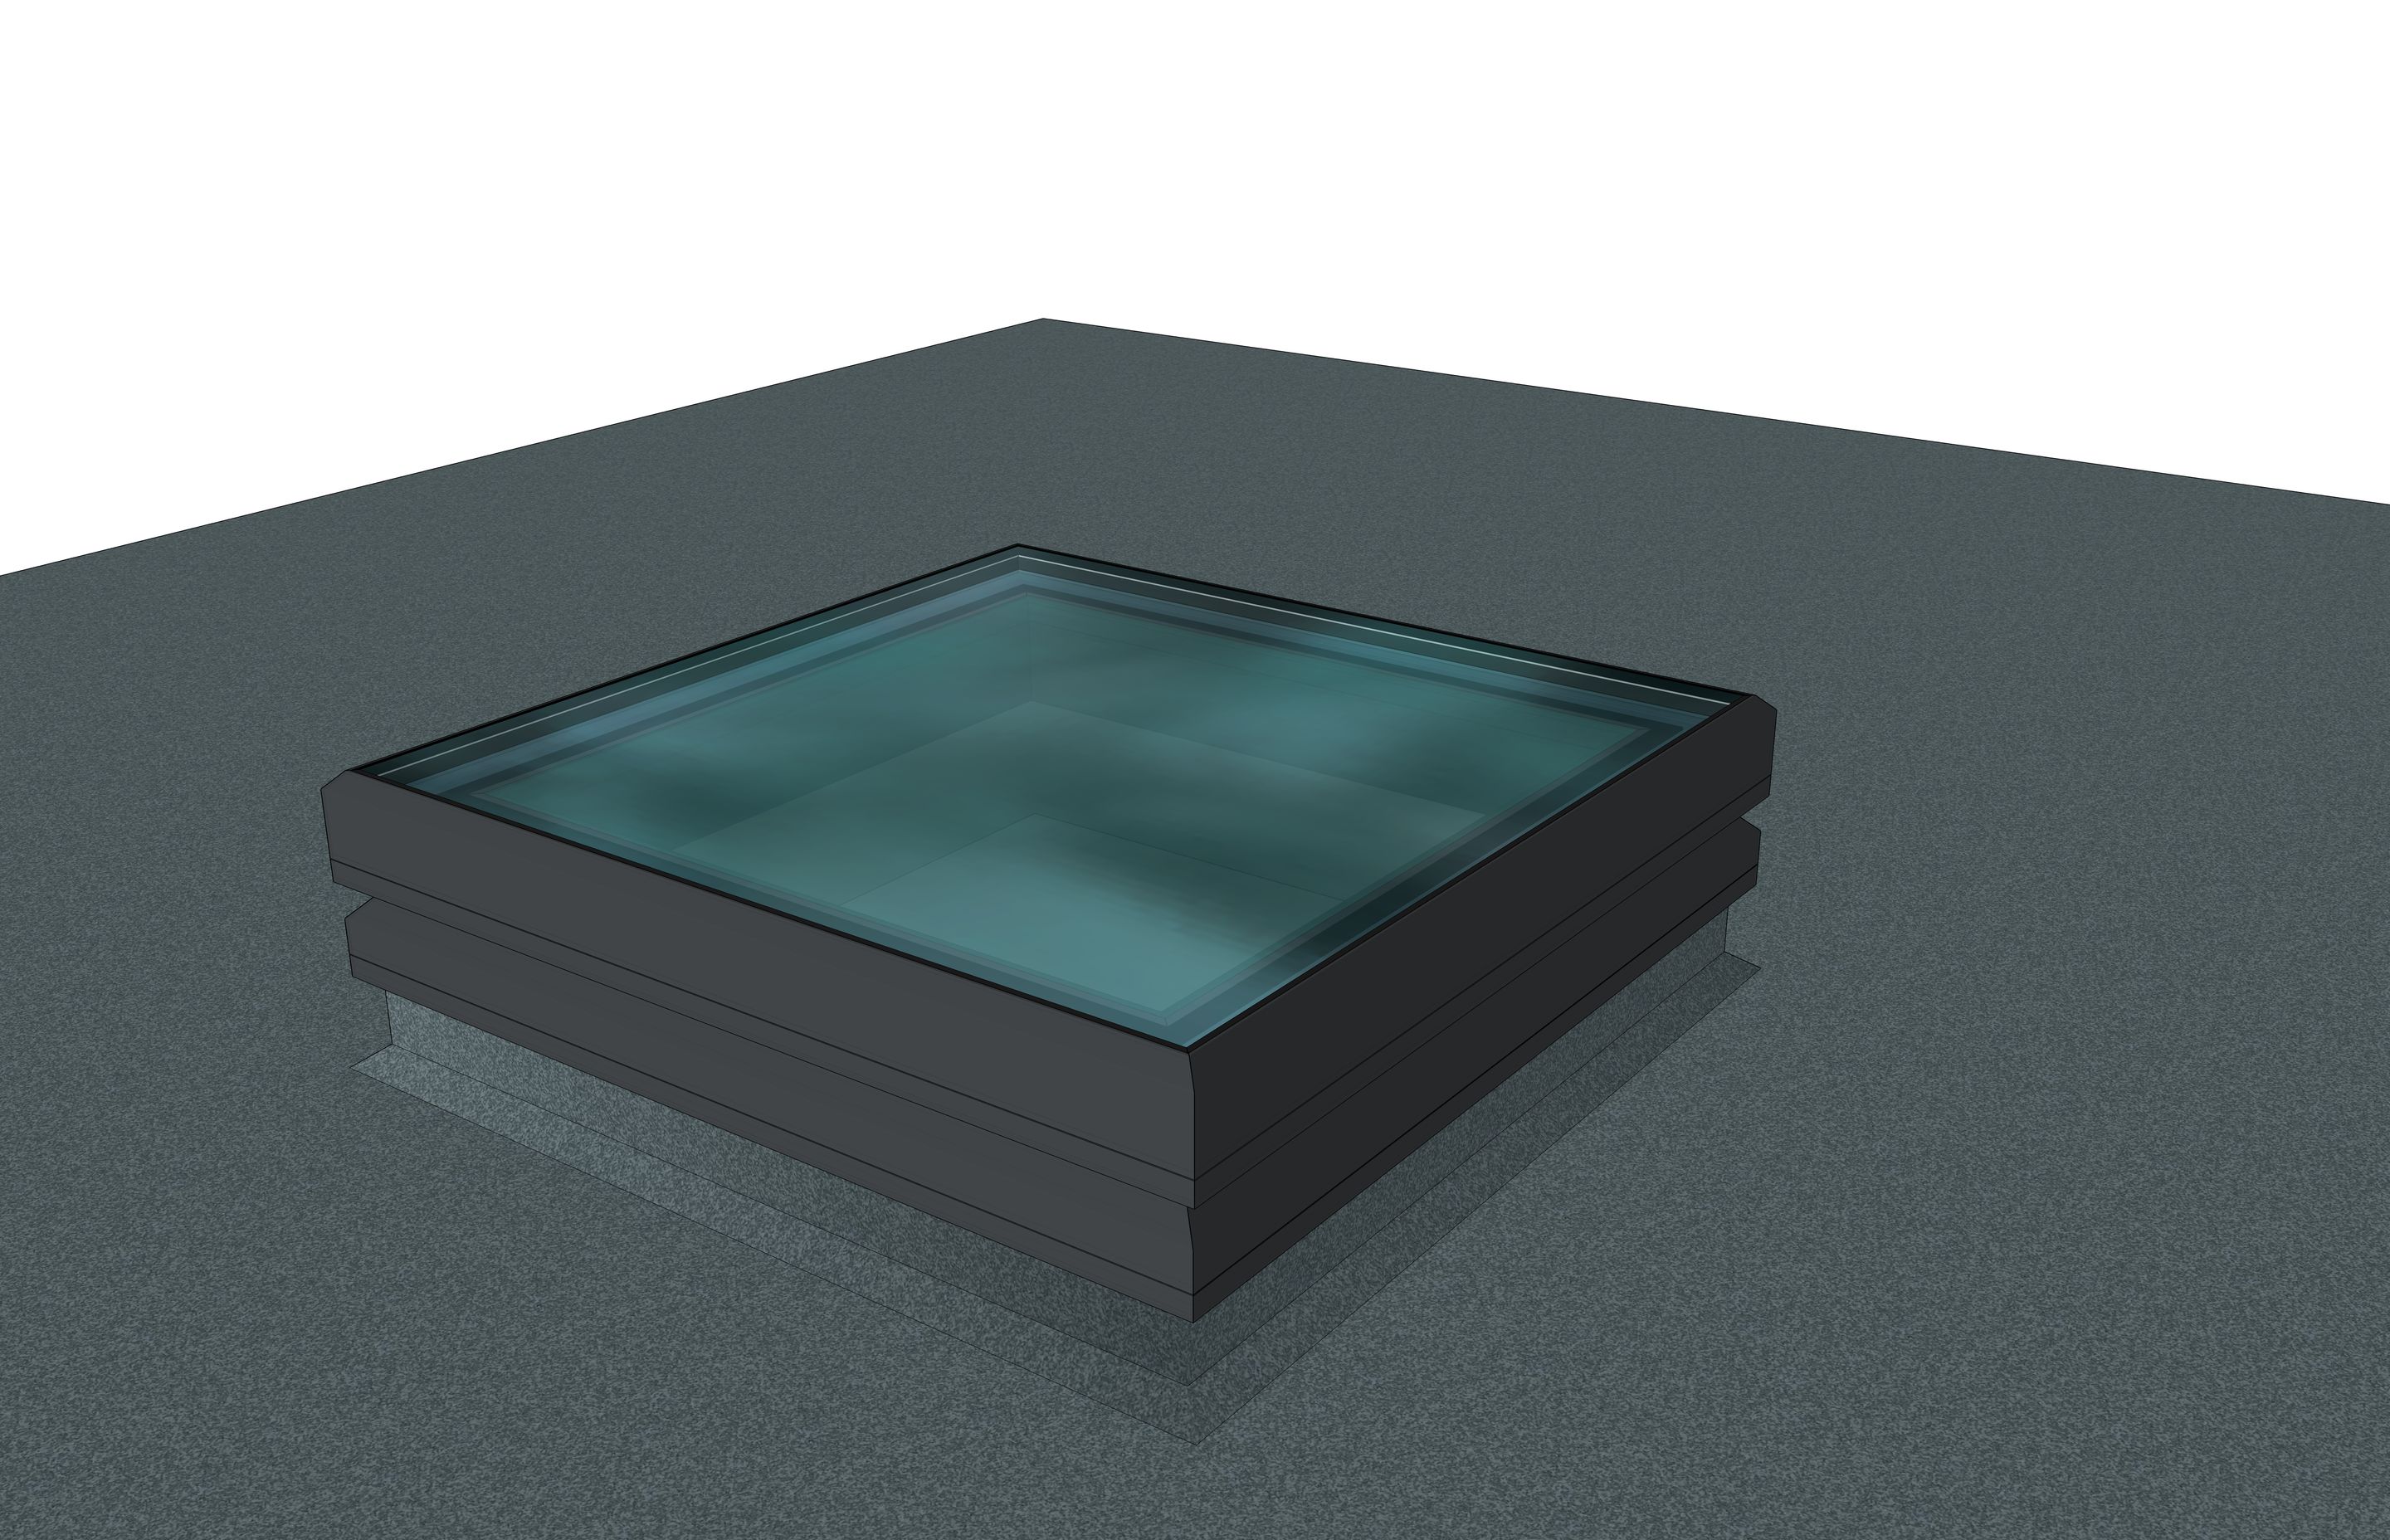 A render of the new Harmony skylight, seen from above.